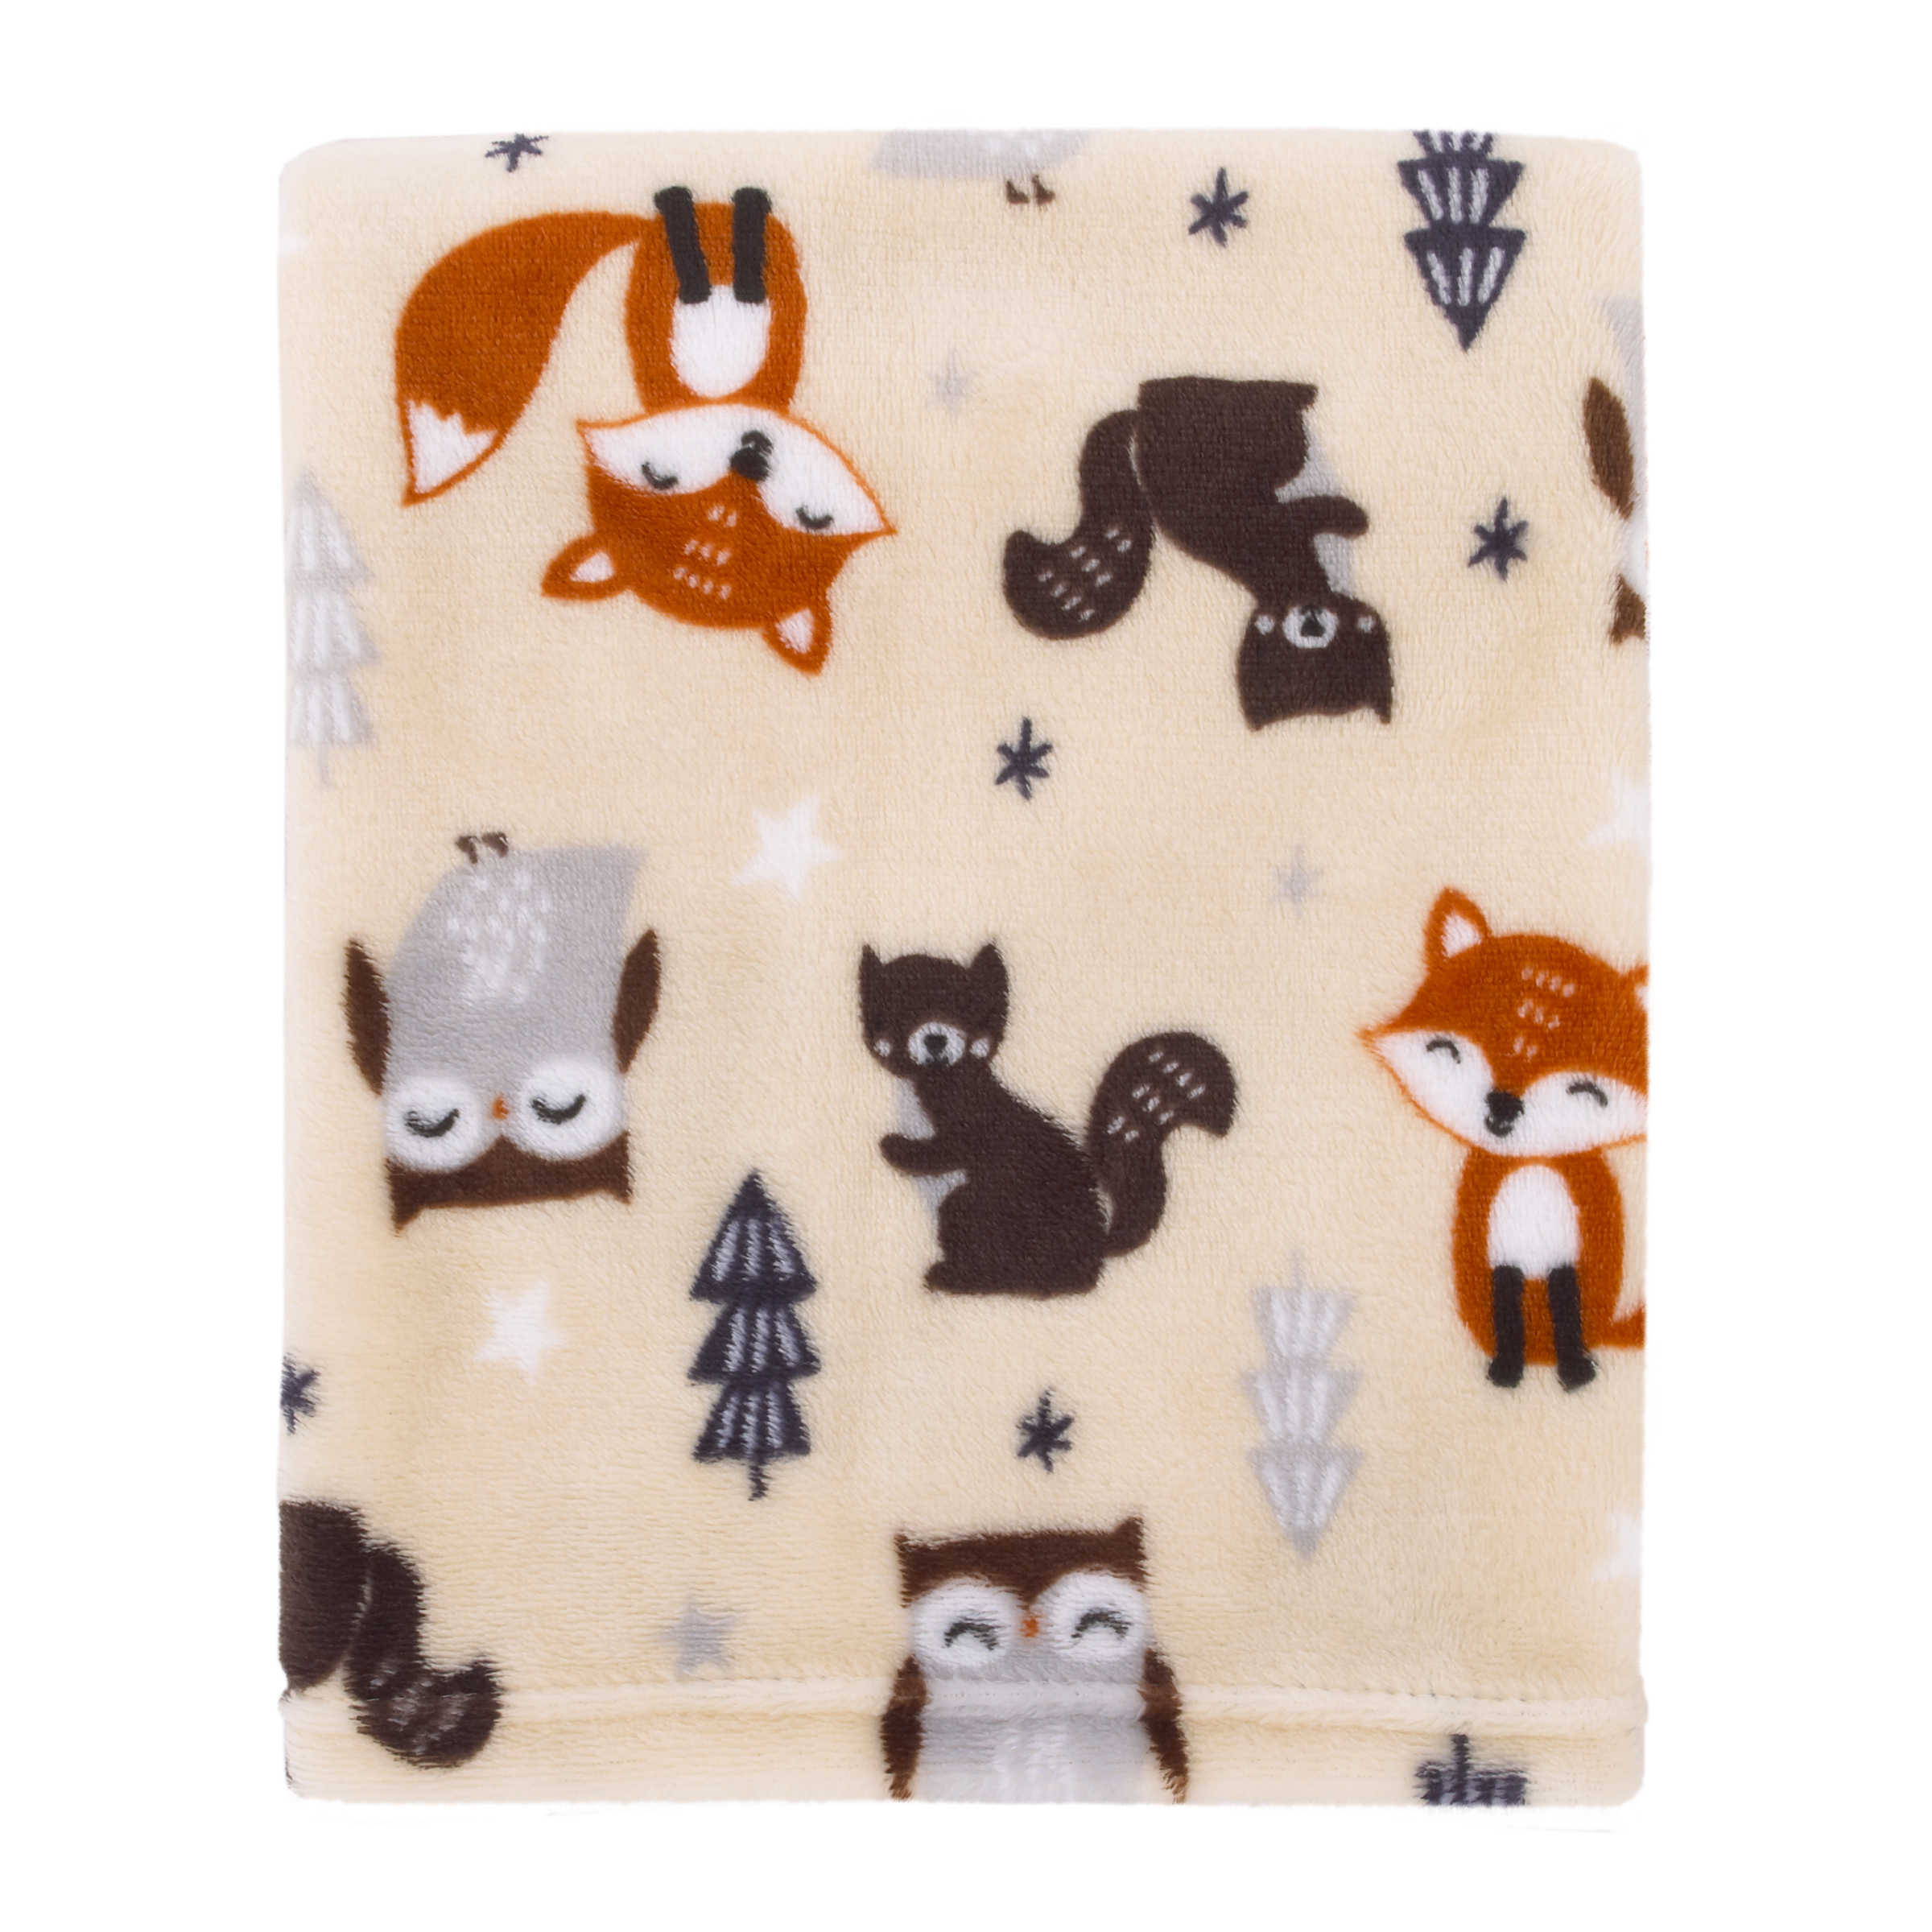 Parent's Choice Fox Woodland Baby Blanket, 30x36 inches - image 1 of 6